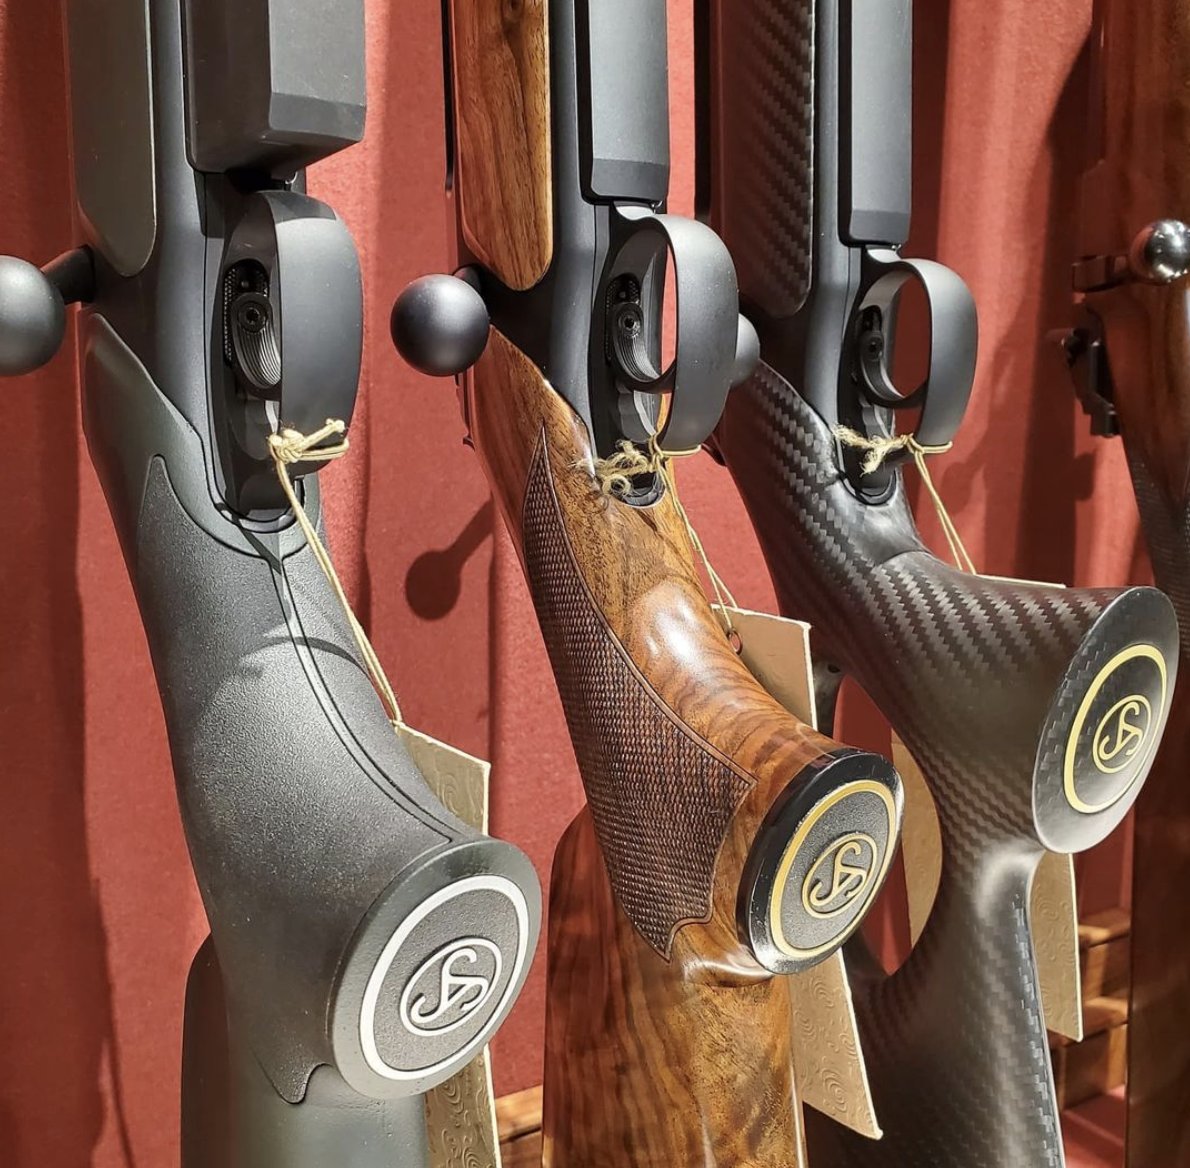 Glad to hear that the SAUER 404 is one of the best selling rifles at @gordyandsons. Looks like they have some real beauties in stock!!
❤️❤️❤️ 

#sauer404 #sauerusa #sauerrifles #sauer